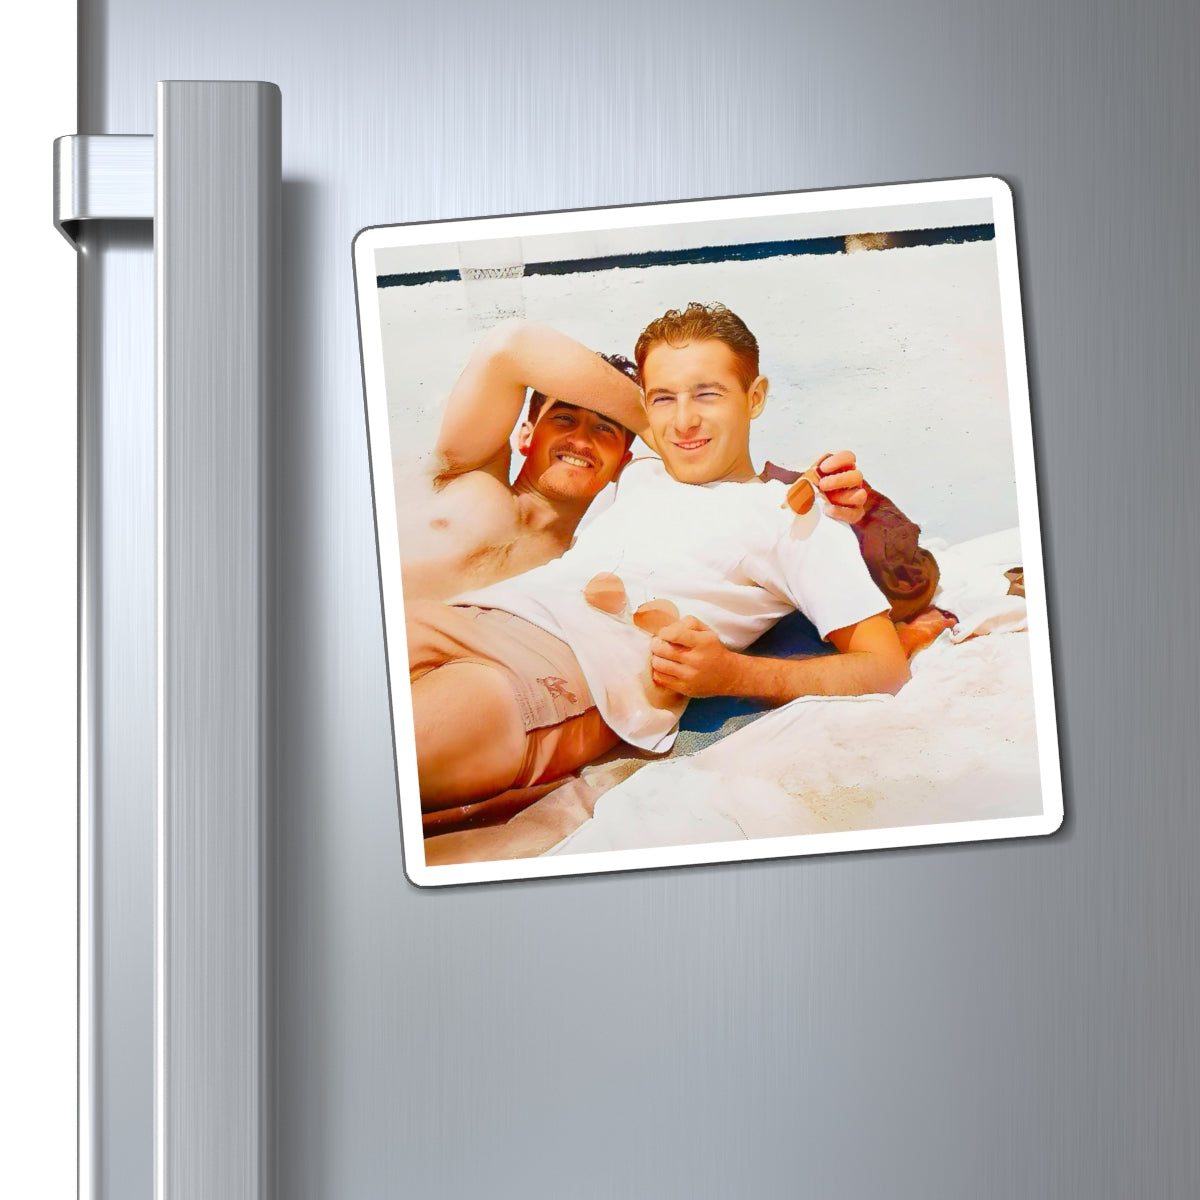 nager 020 | Magnets Gay Couple Beach Vintage Affectionate Men Queer California LGBTQ